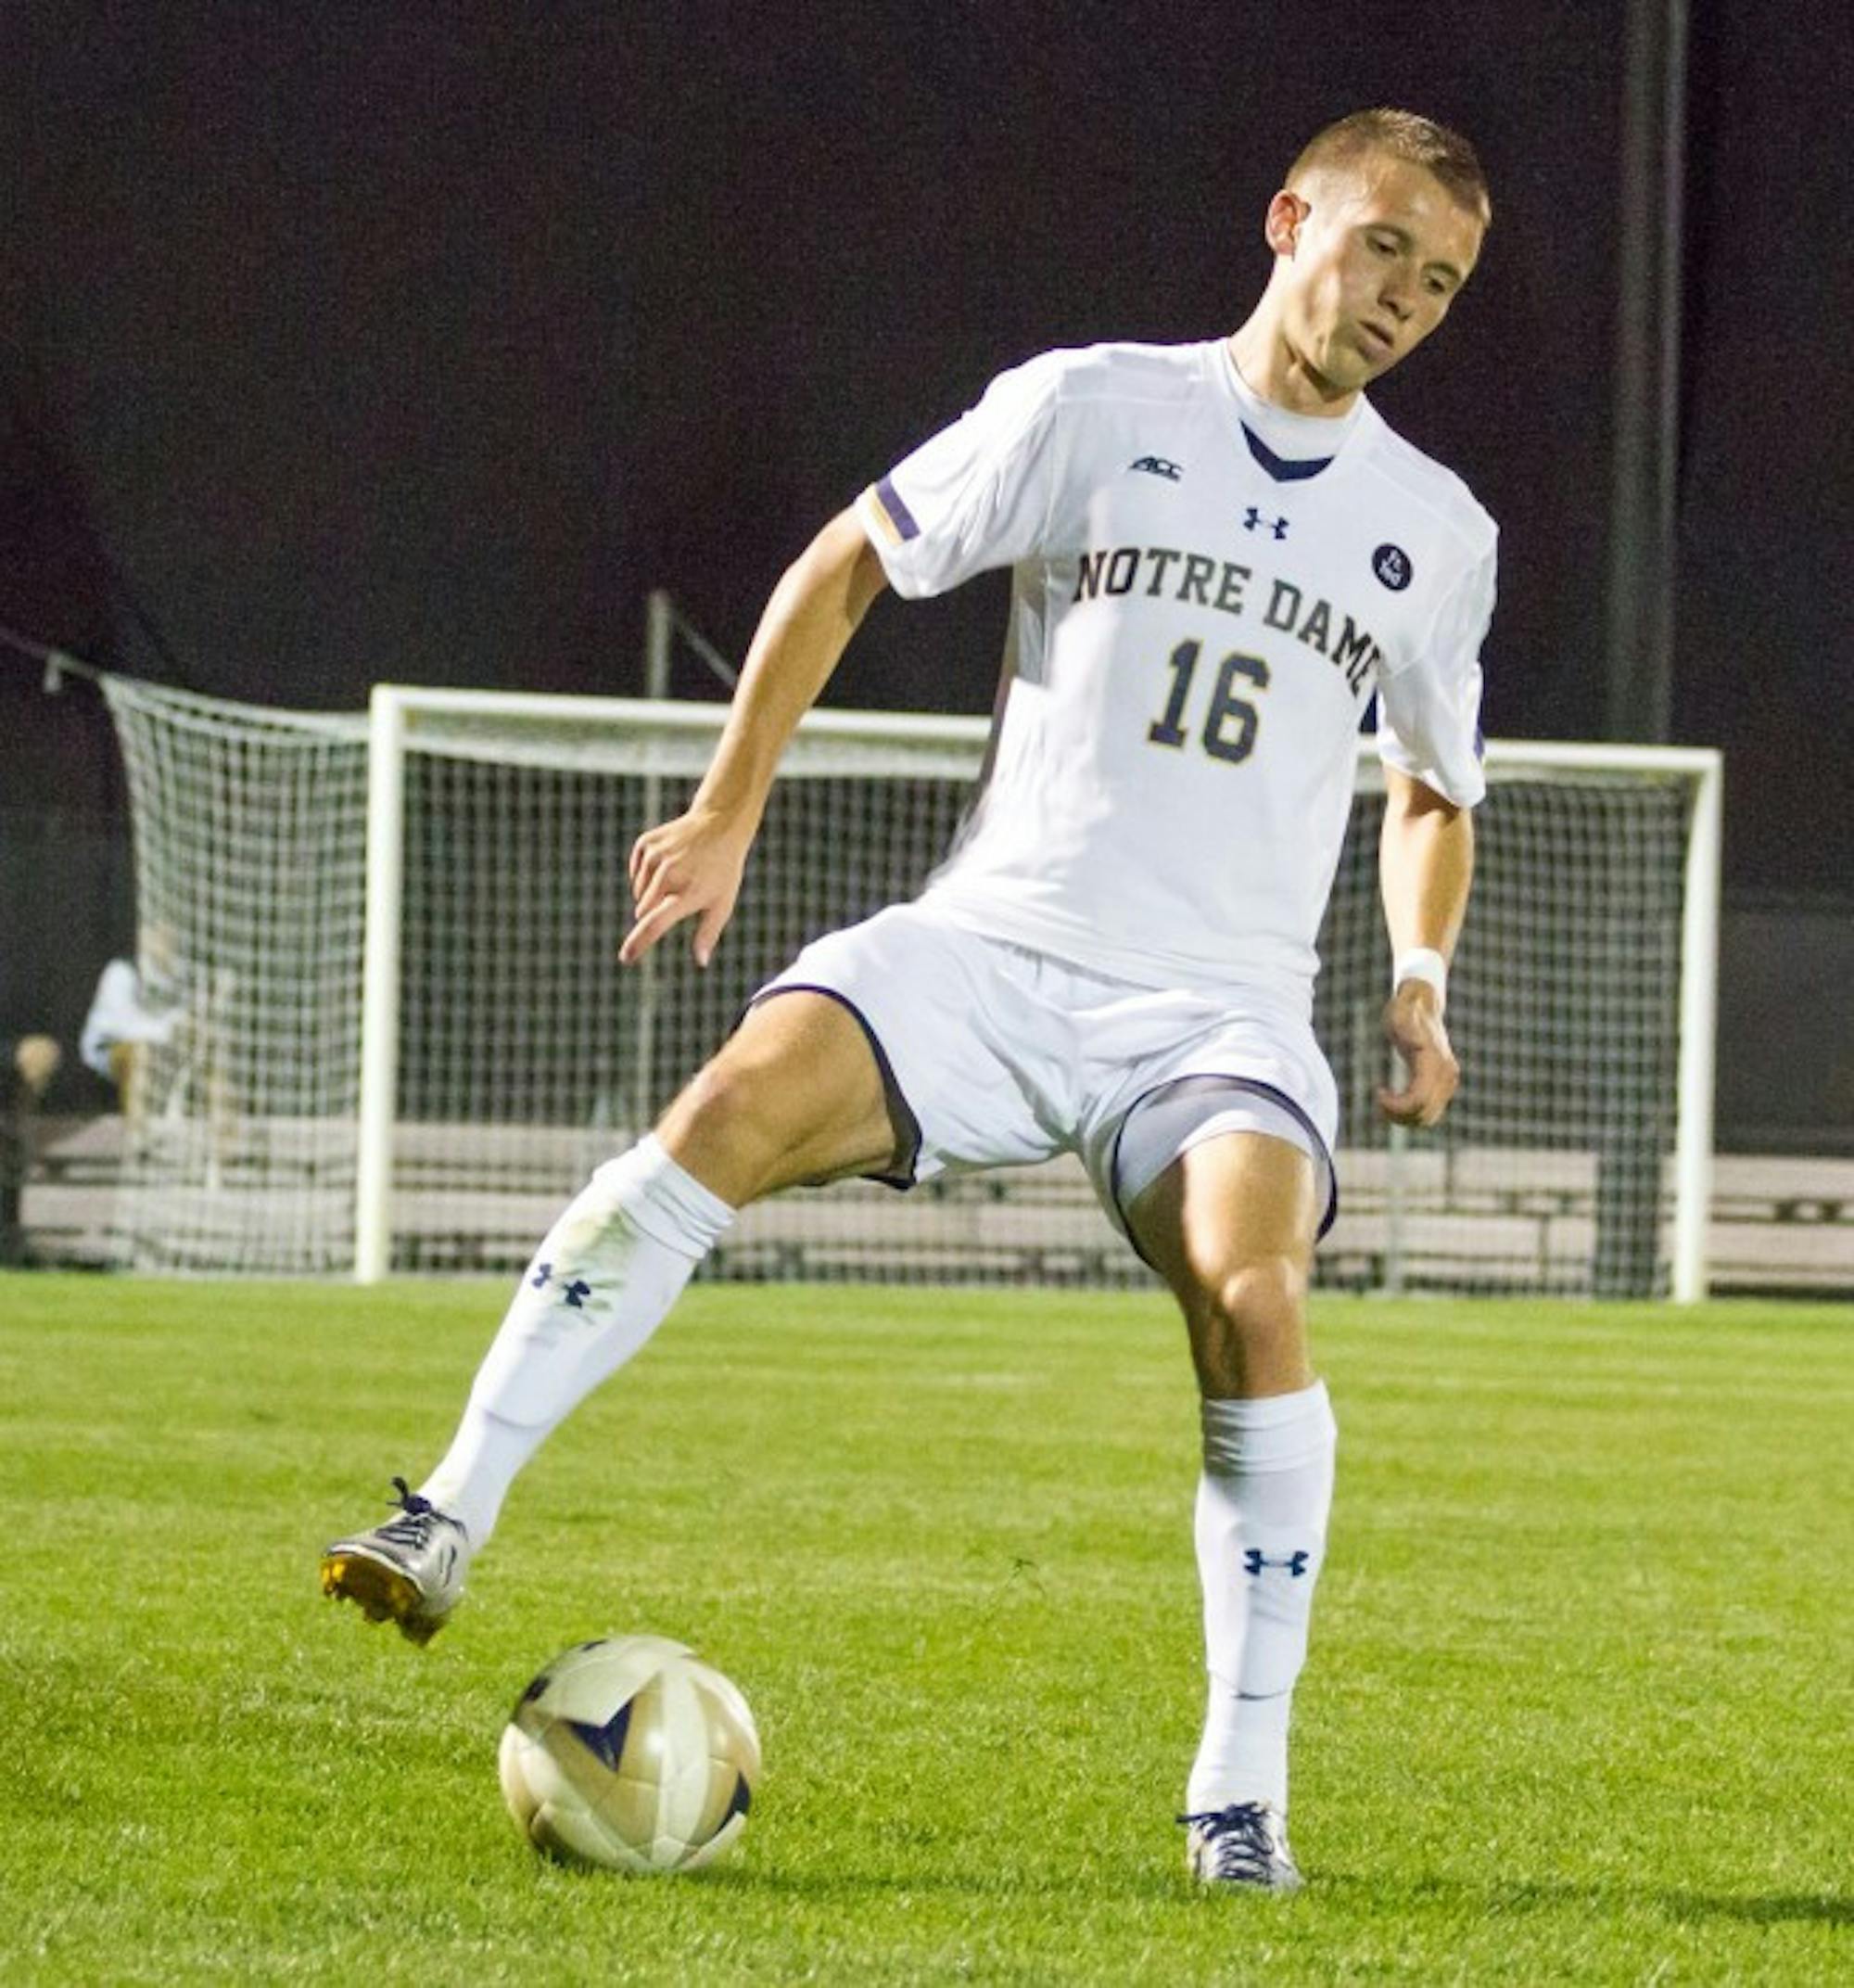 Senior defender Michael Shipp corrals the ball during Notre Dame’s 3-1 victory over Virginia on Sept. 25 at Alumni Stadium.